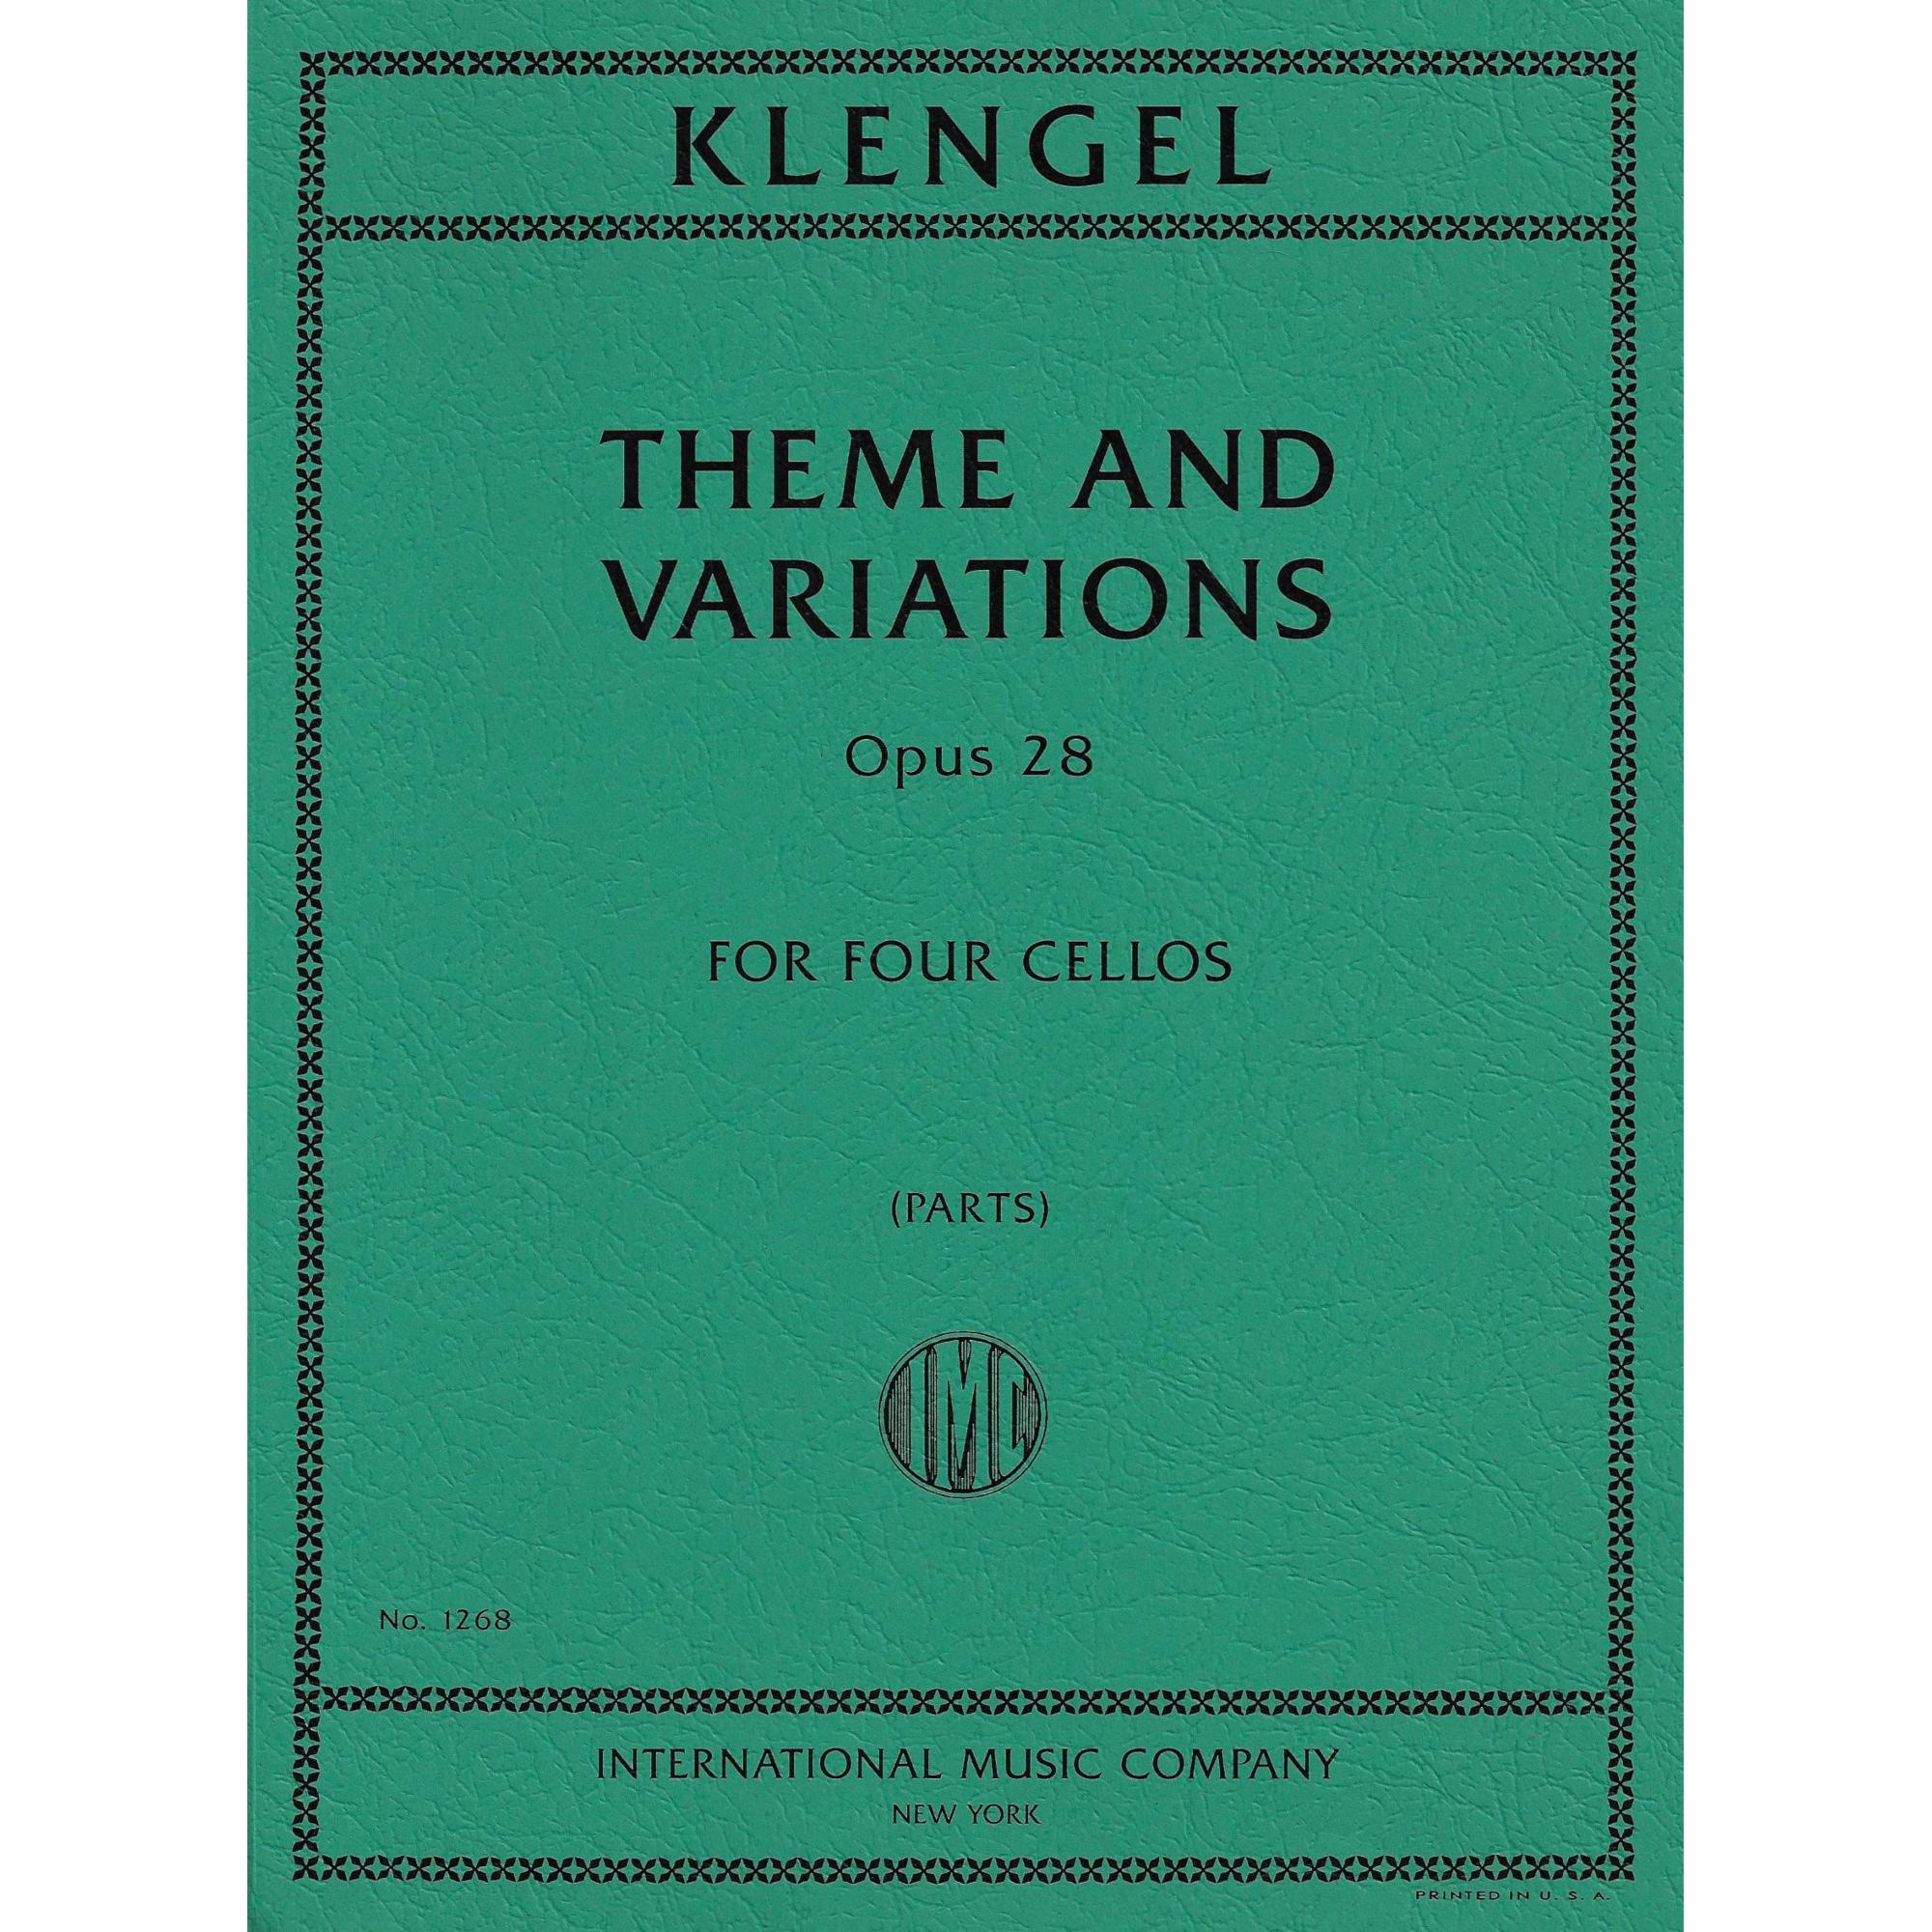 Klengel -- Theme and Variations, Op. 28 for Four Cellos